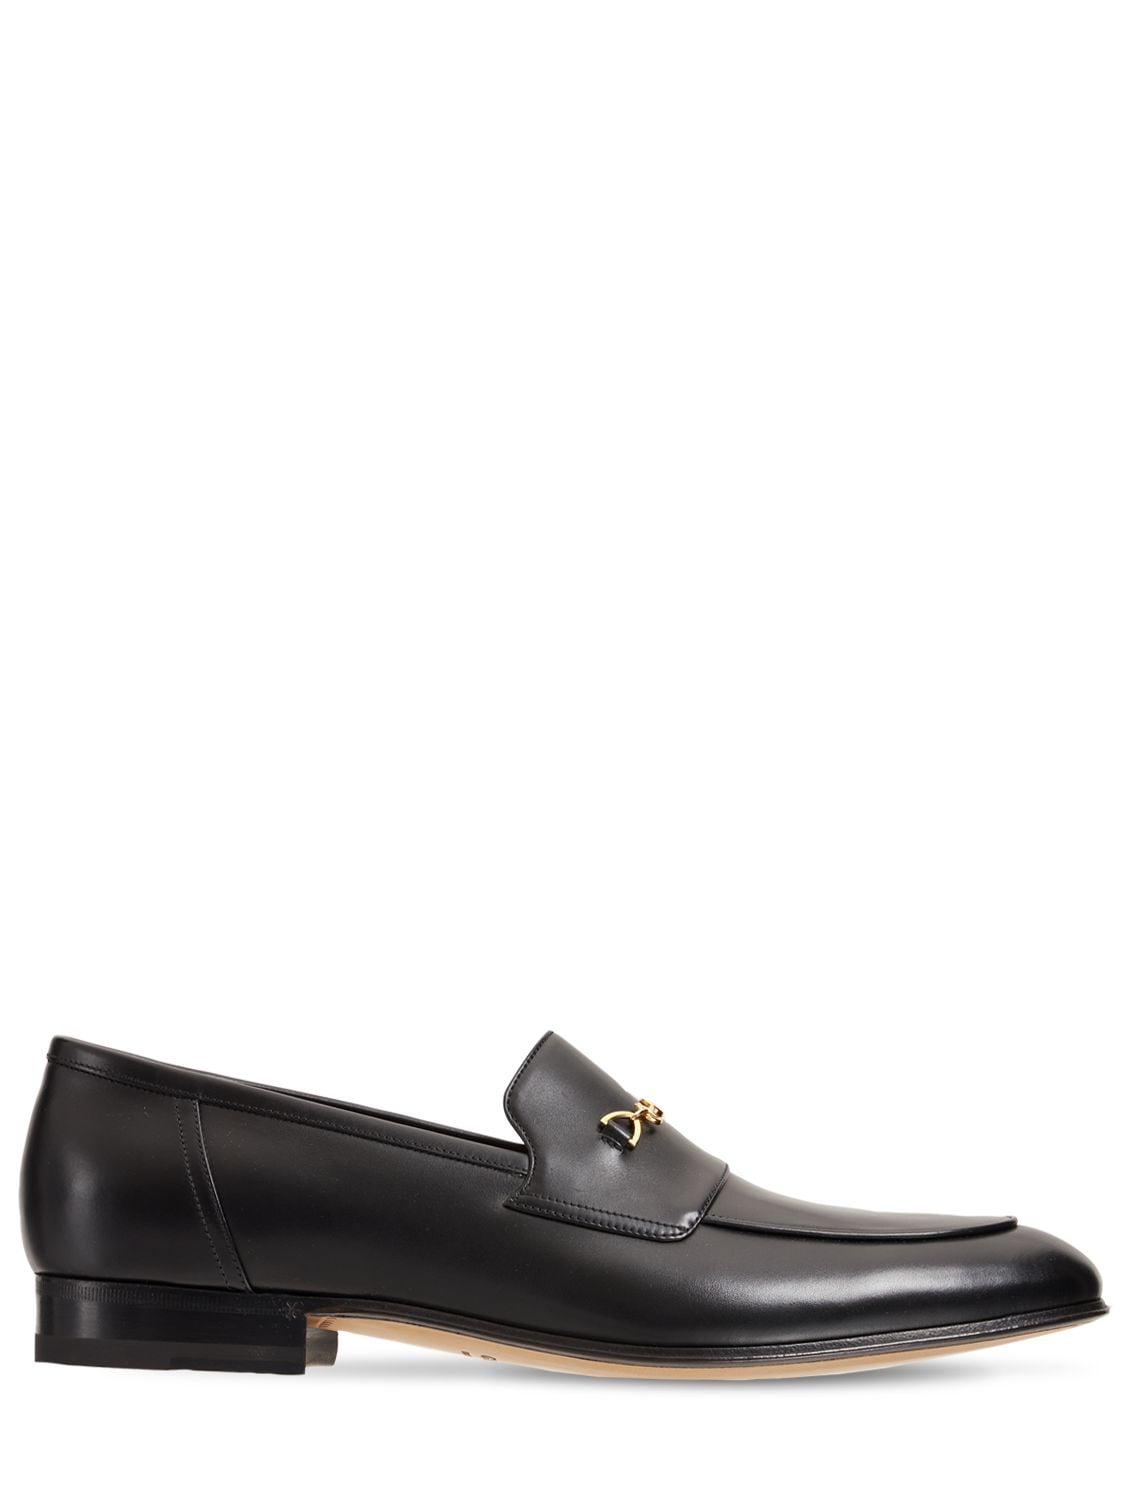 Gucci Ed Leather Loafers W/ Horsebit In Black | ModeSens